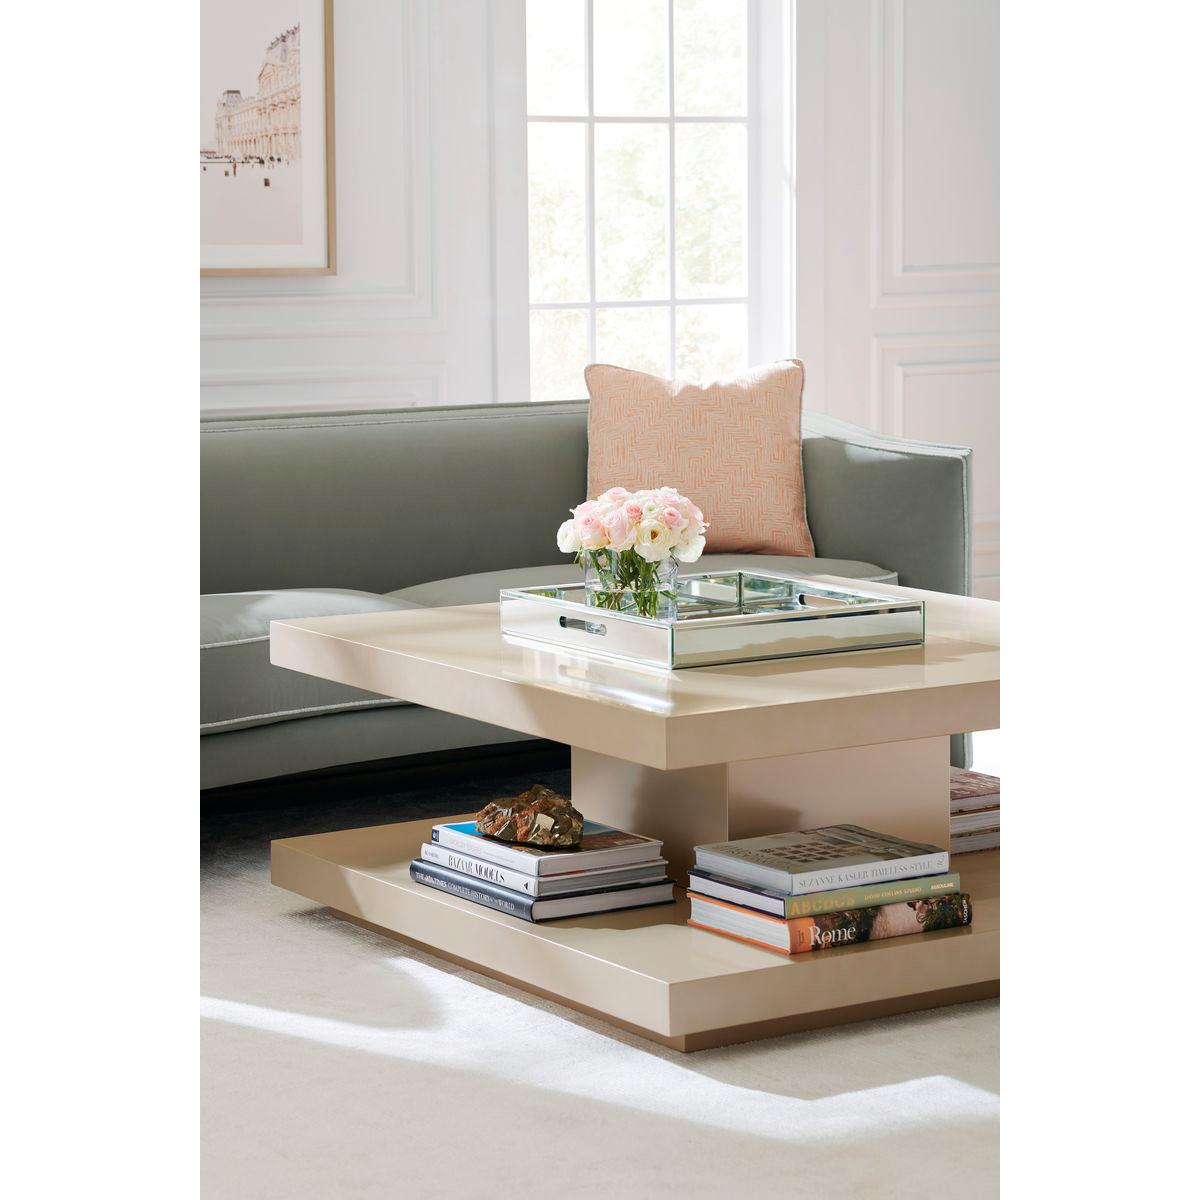 Minimalist Cool and Classic Coffee Table For Sale